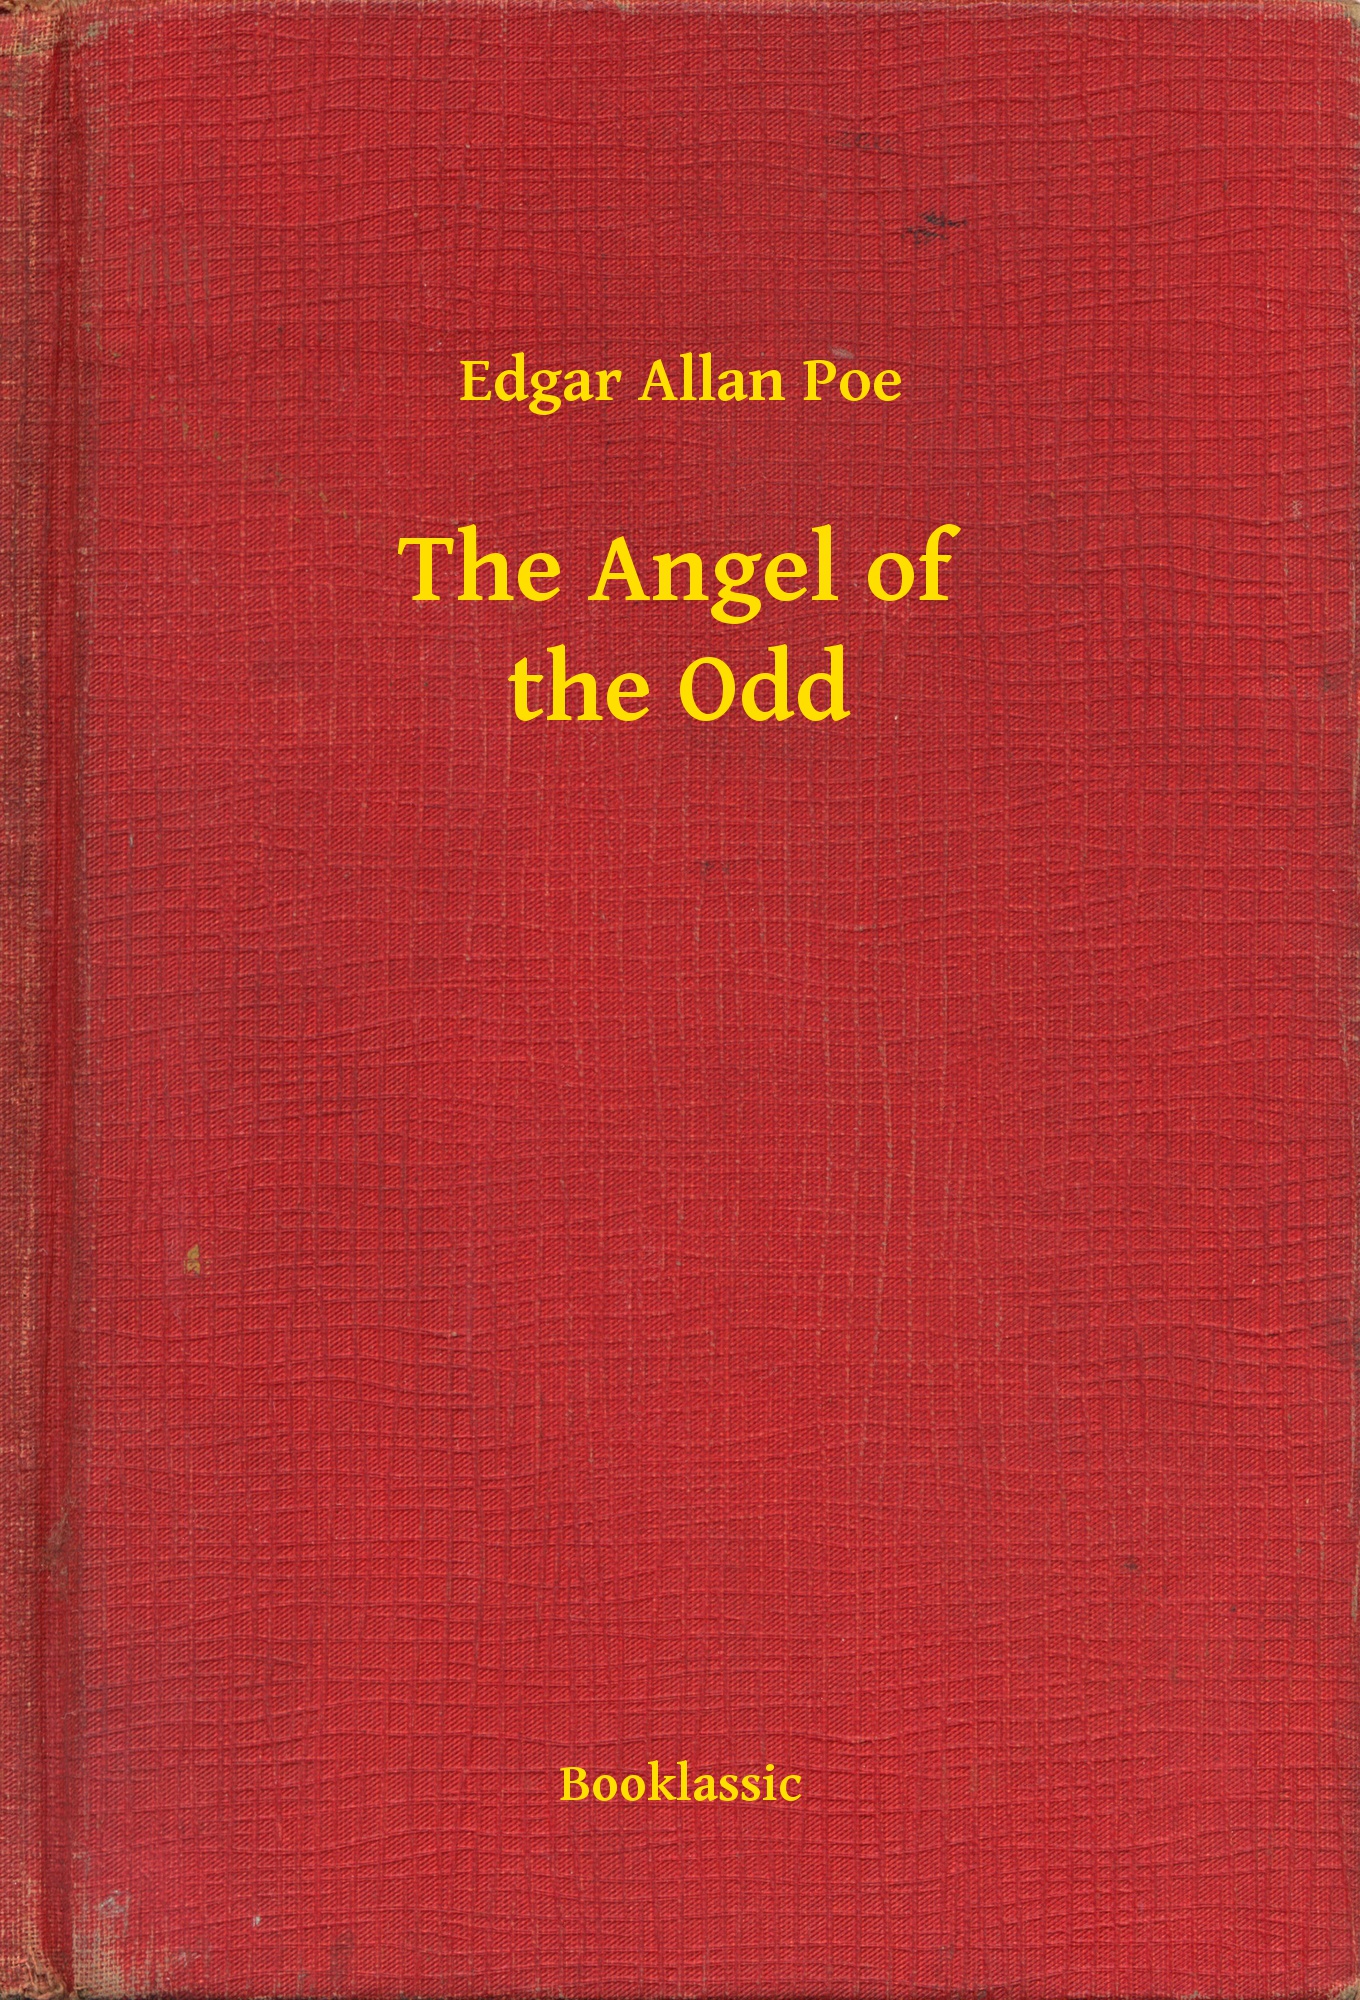 The Angel of the Odd